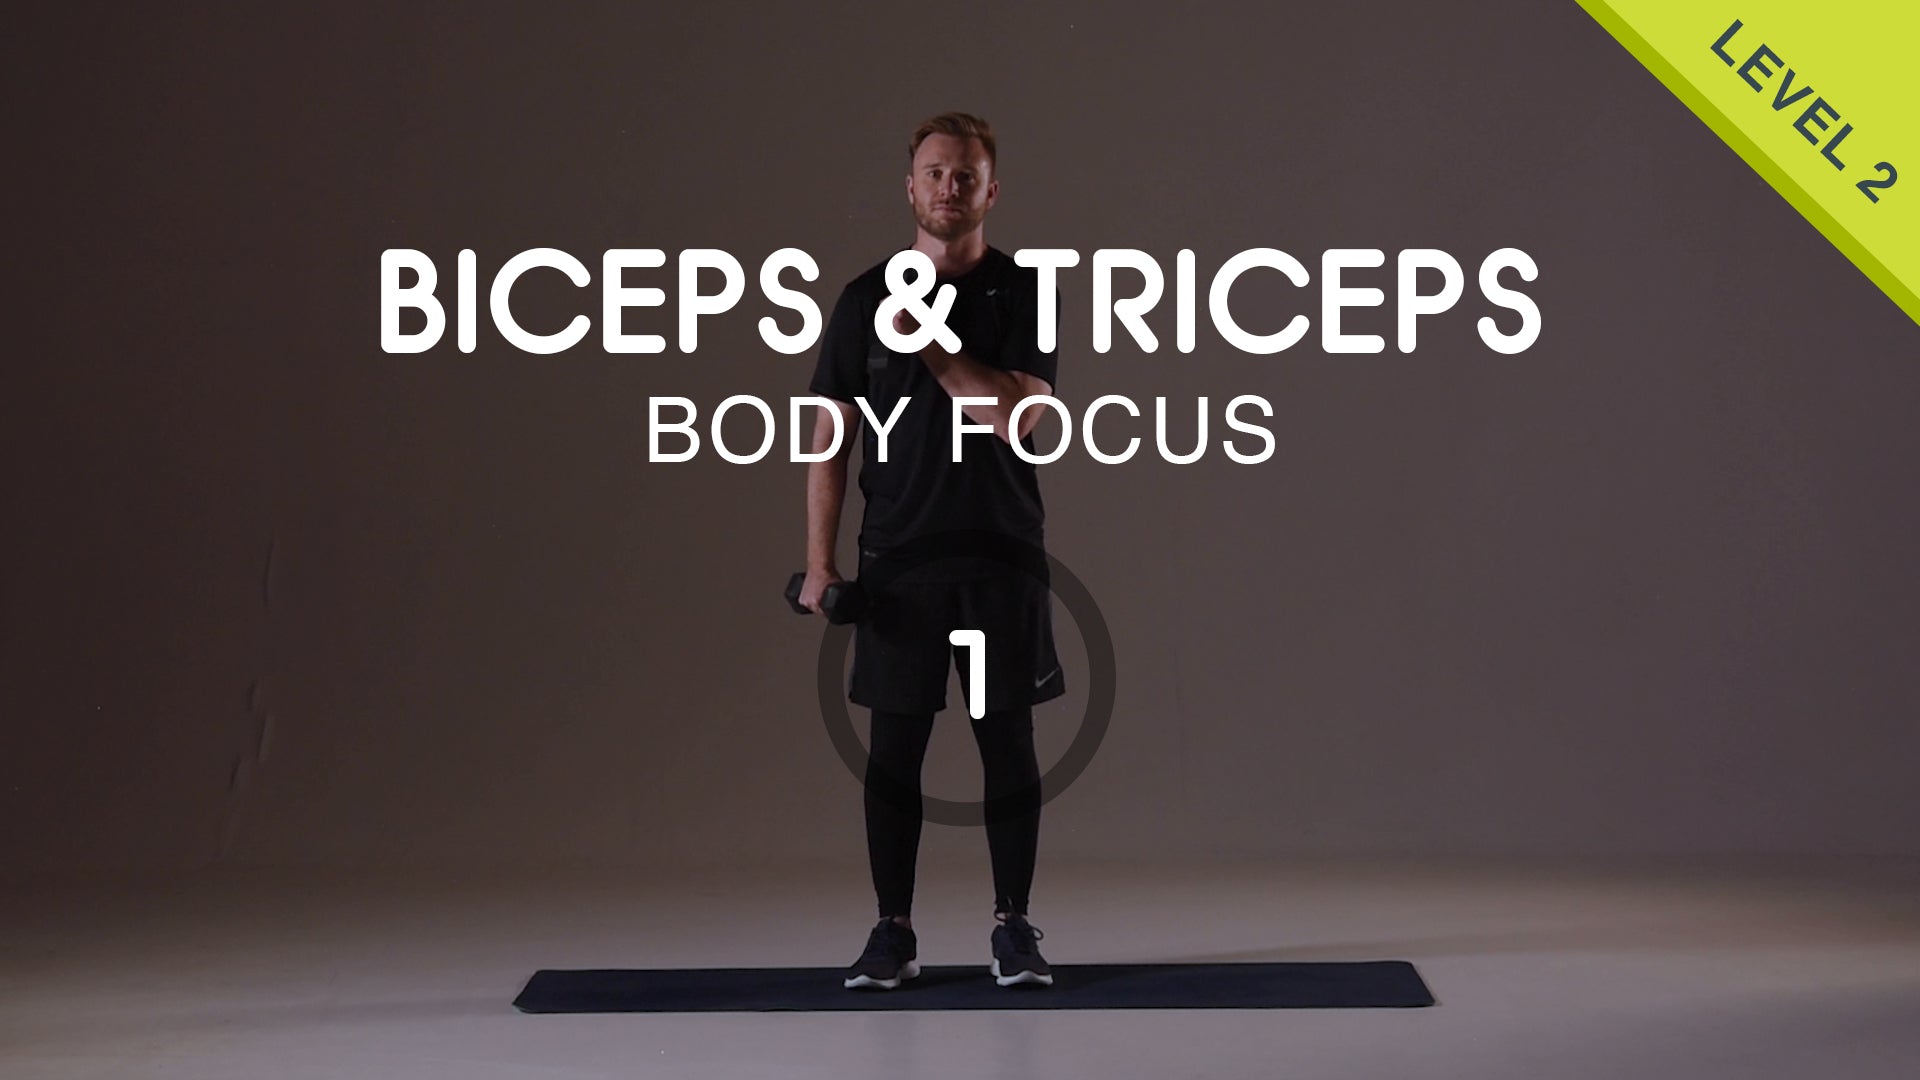 7 minute Workout - Biceps & Triceps - Free Home Workout Video